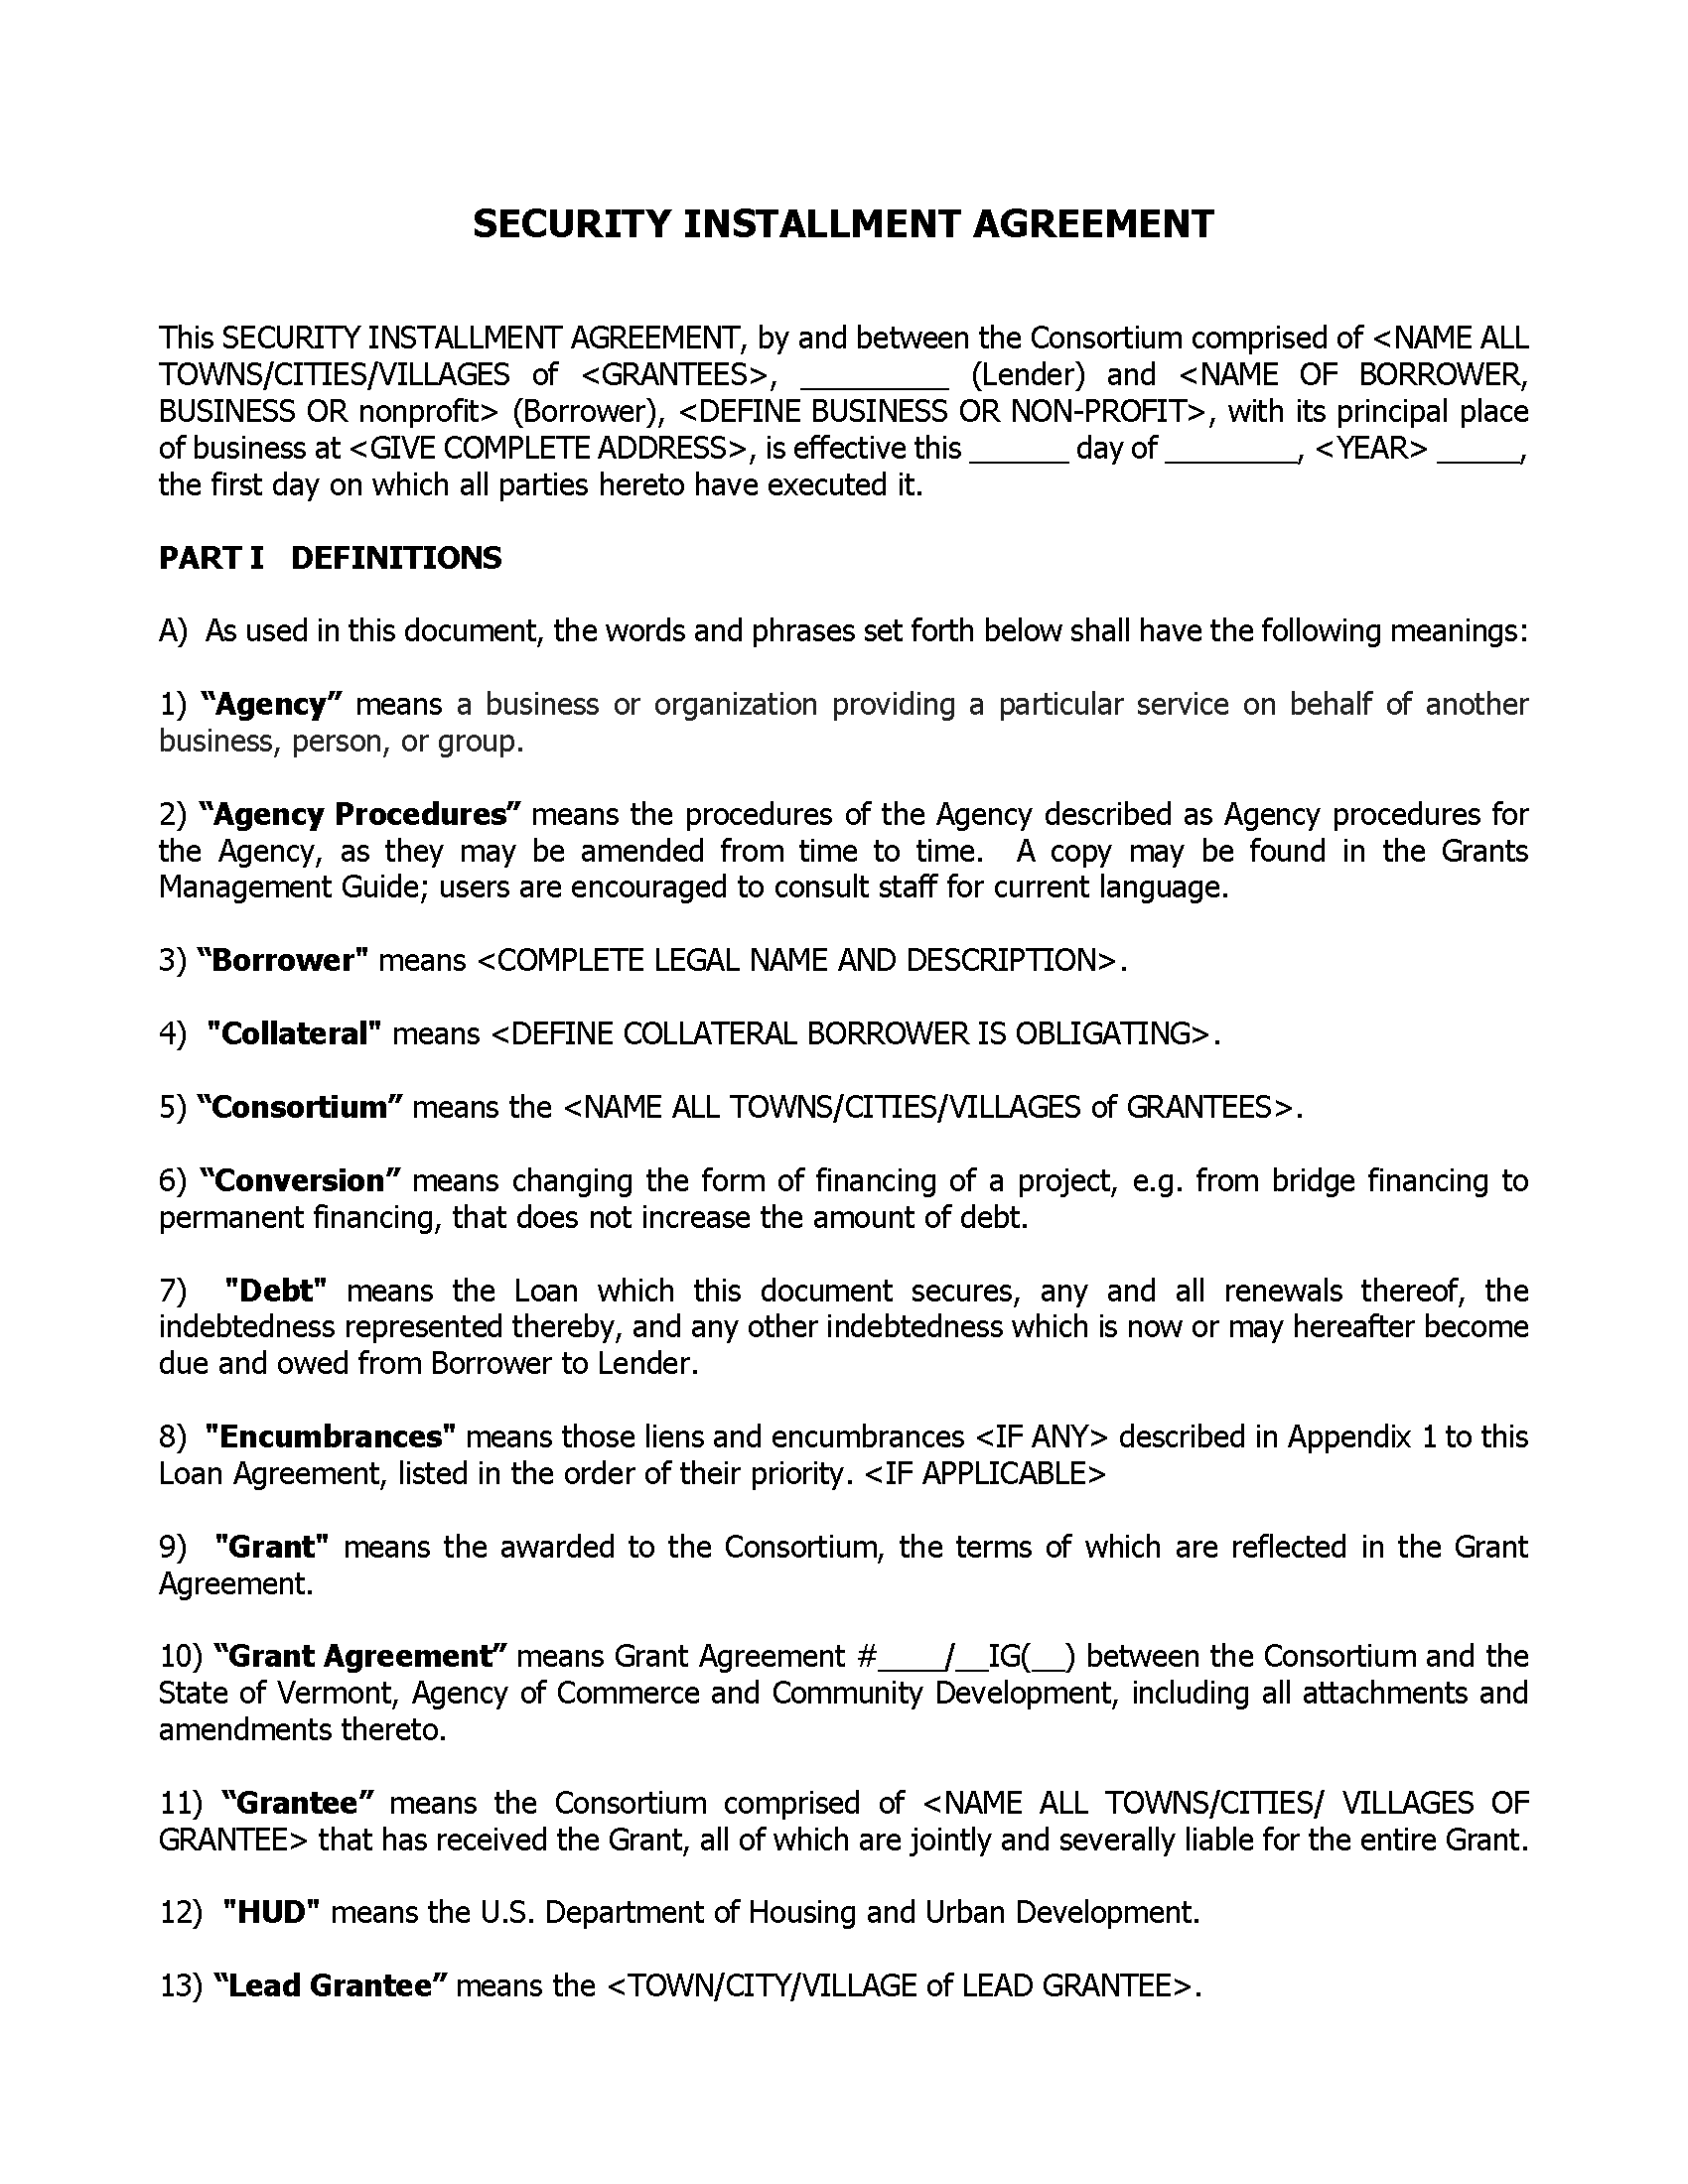 Security Installment Agreement